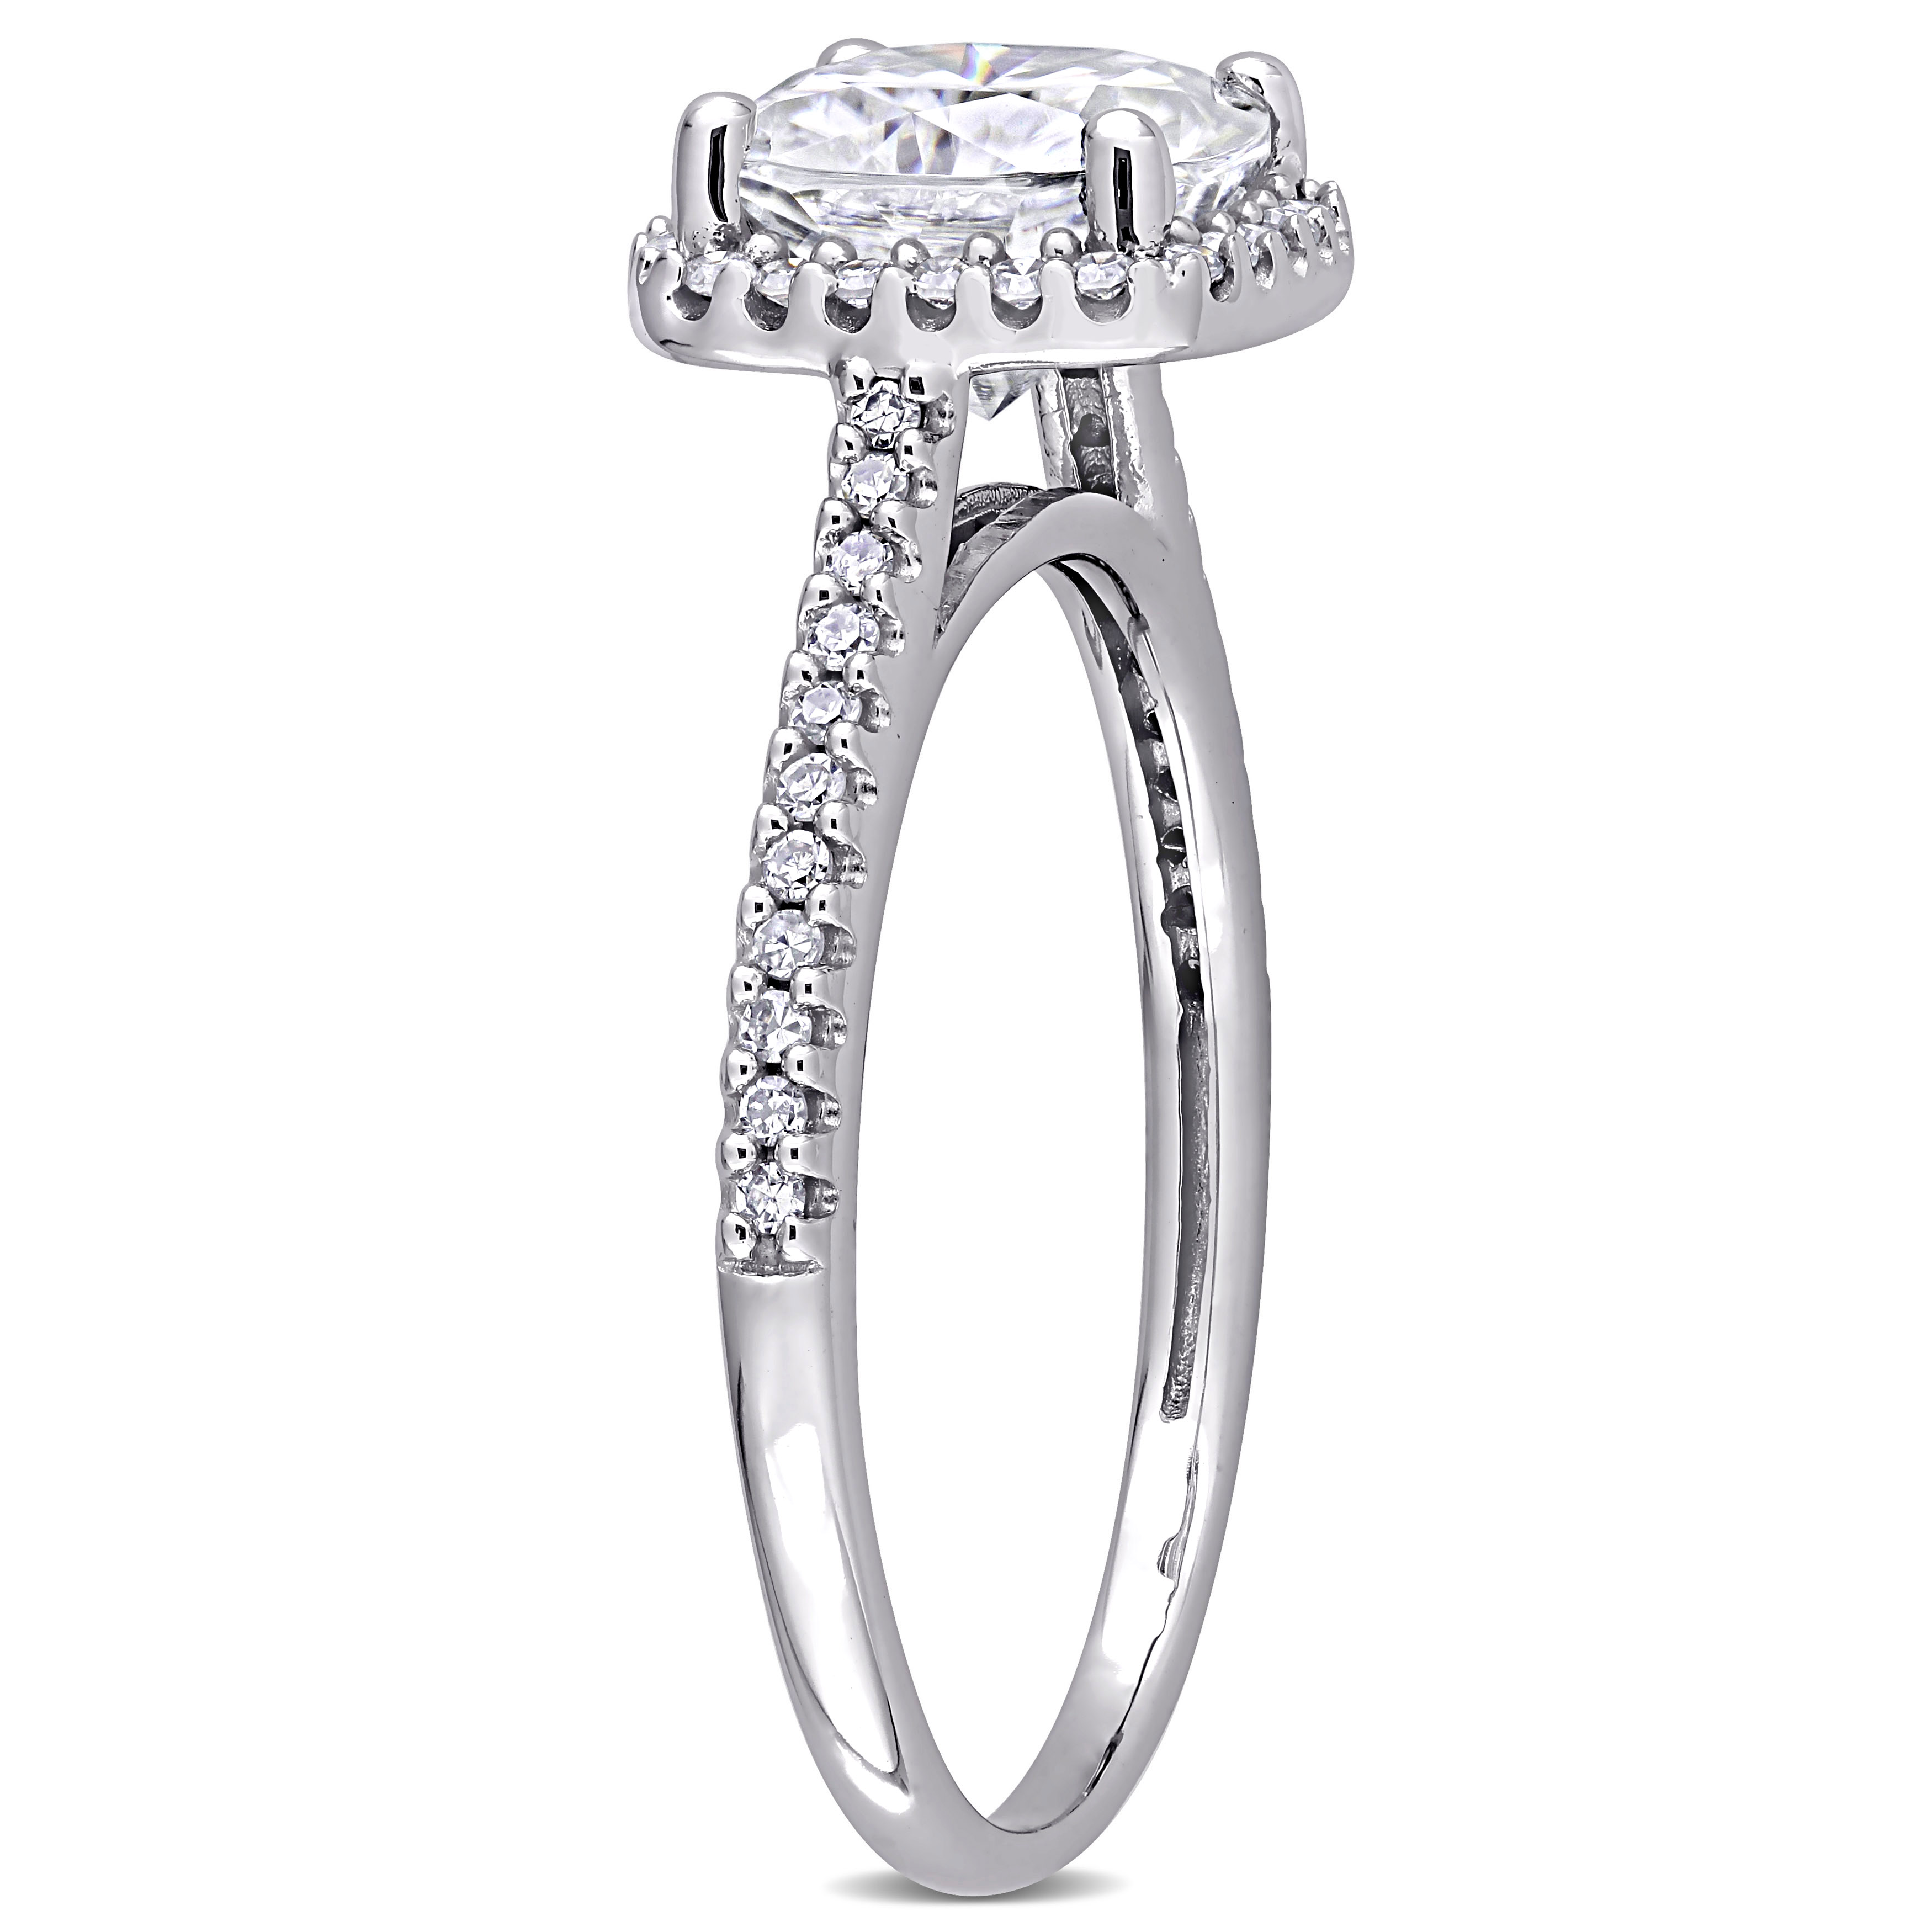 2 CT TGW Cushion Created Moissanite and 1/4 CT TW Diamond Halo Engagement Ring in 14k White Gold